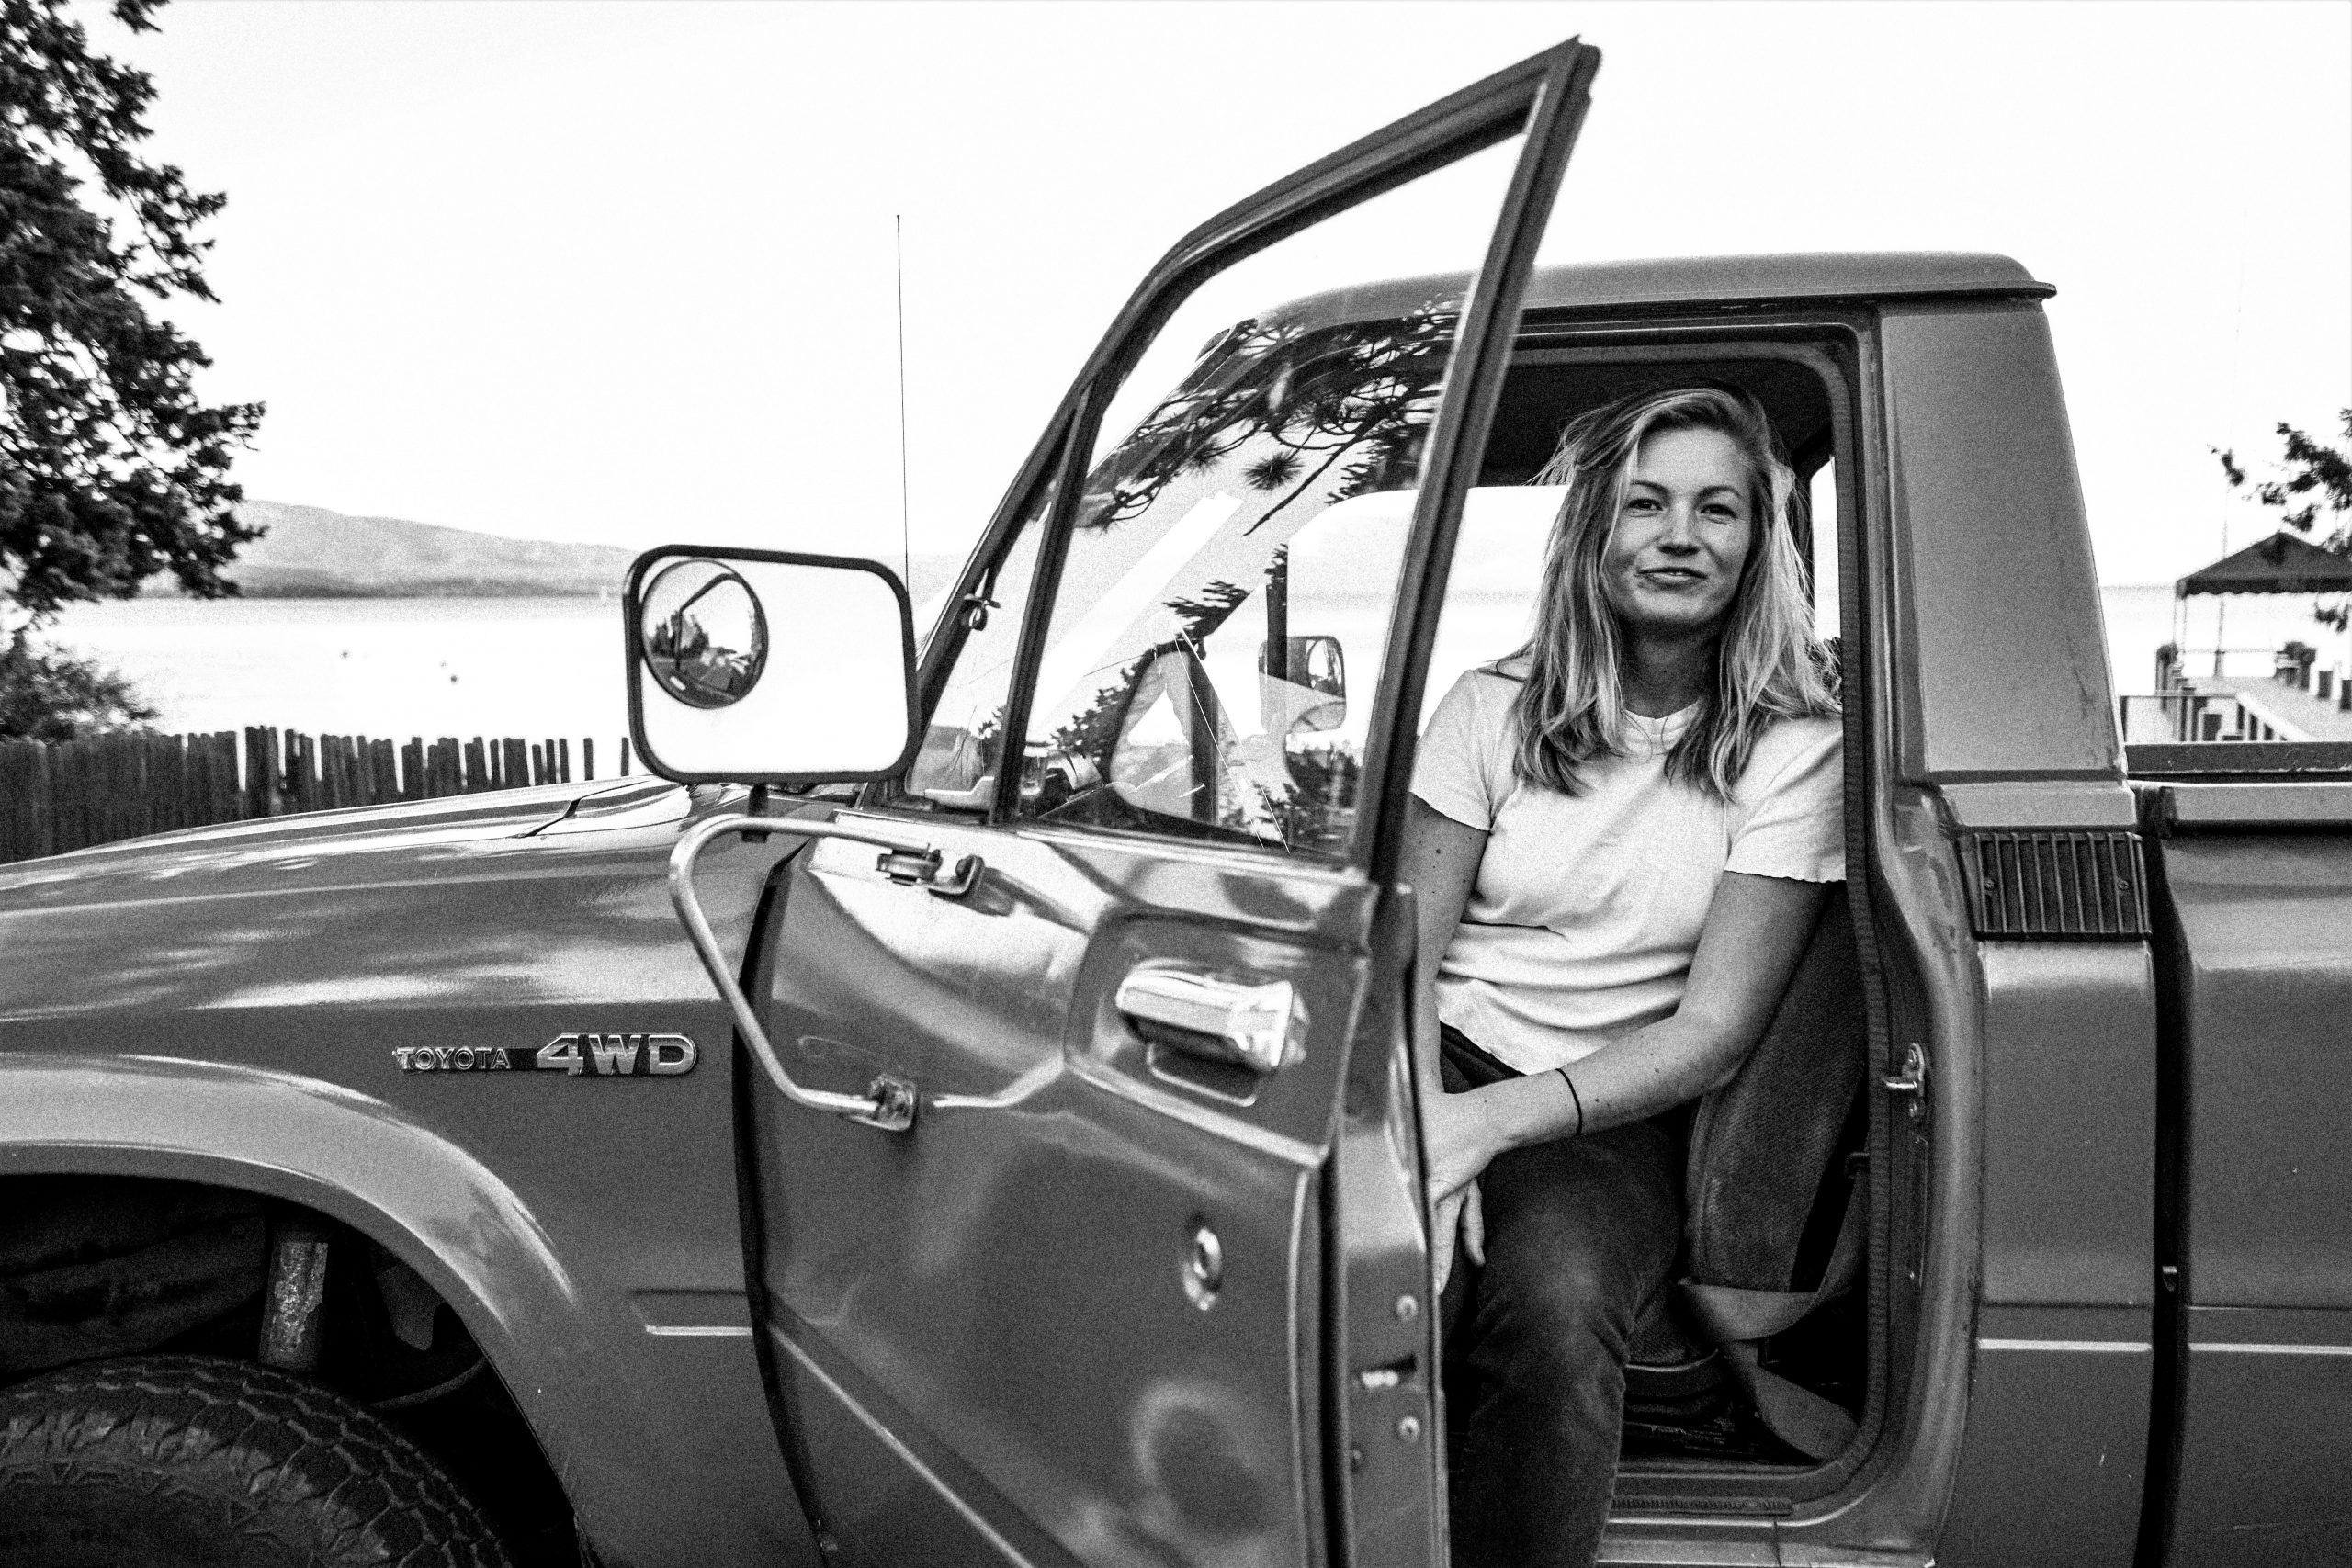 woman smiling at camera from front seat of vintage truck in black and white photo